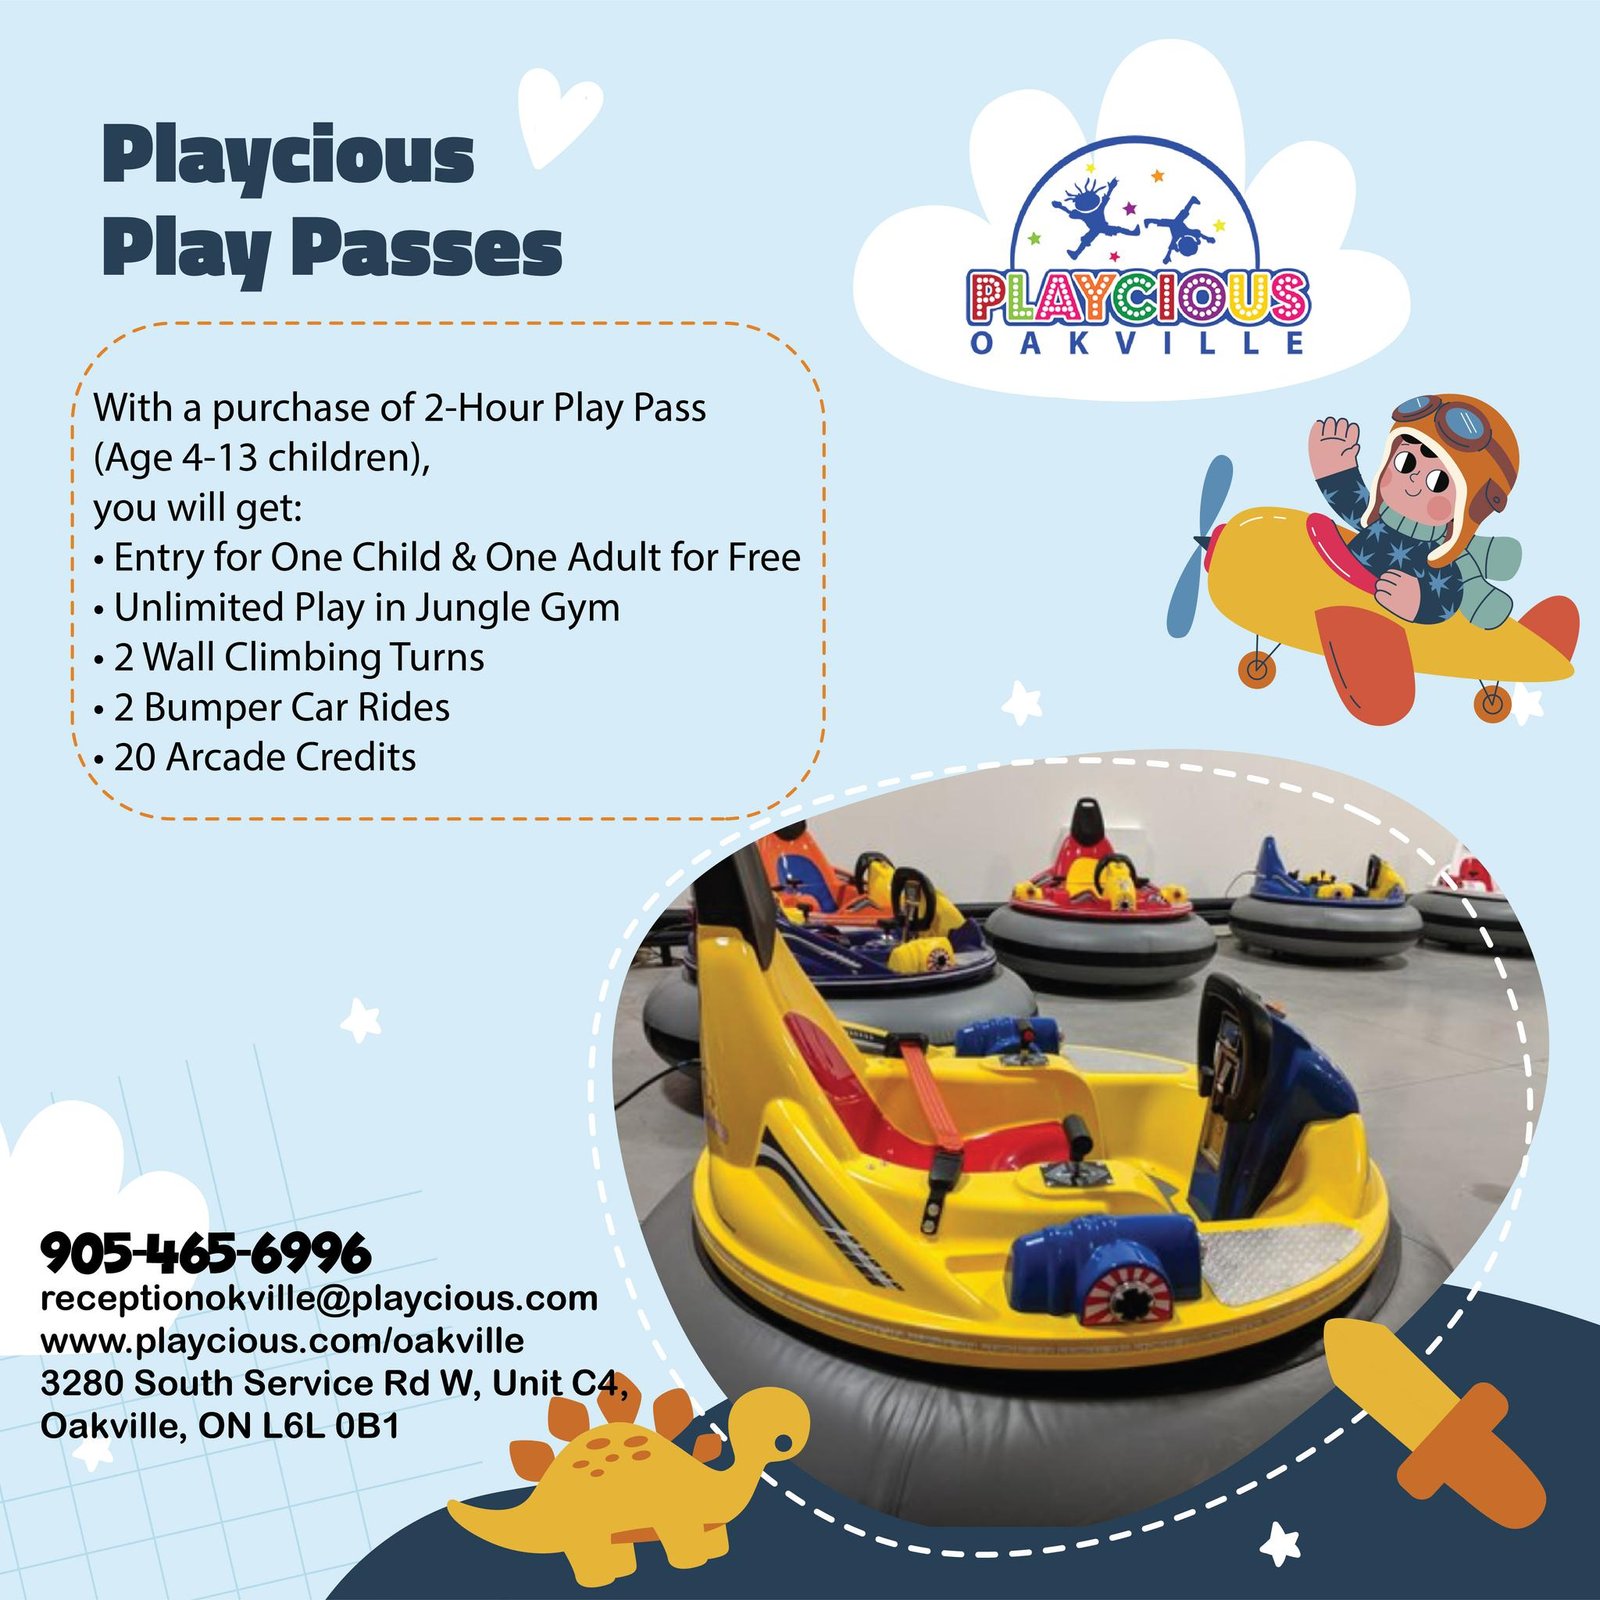 Playcious Play Passes
With a purchase of 2-Hour Play Pass (Age 4-13 children),
you will get:
• Entry for One Child & One Adult for Free
• Unlimited Play in Jungle Gym
• 2 Wall Climbing Turns
• 2 Bumper Car Rides
• 20 Arcade Credits

For detail, contact us at:
+1 905-465-6996
receptionoakville@playcious.com
www.playcious.com/oakville
3280 South Service Rd W, Unit C4, Oakville, ON L6L 0B1

#playcious #oakville #timetoplay #sanitize #marchcamp #party #bdaycelebration #balloondecor #partytime #eventplanner #kidsactivitiesathome #toys #playtime #fun #playathome #kidsroomdecor #babyplayideas #babyactivities #kidsdevelopment #babyshop #kidsfashionblog #kidsplayground #playmat #kidplayground #kidsafe #play #playgroundbangkok #babyplanet